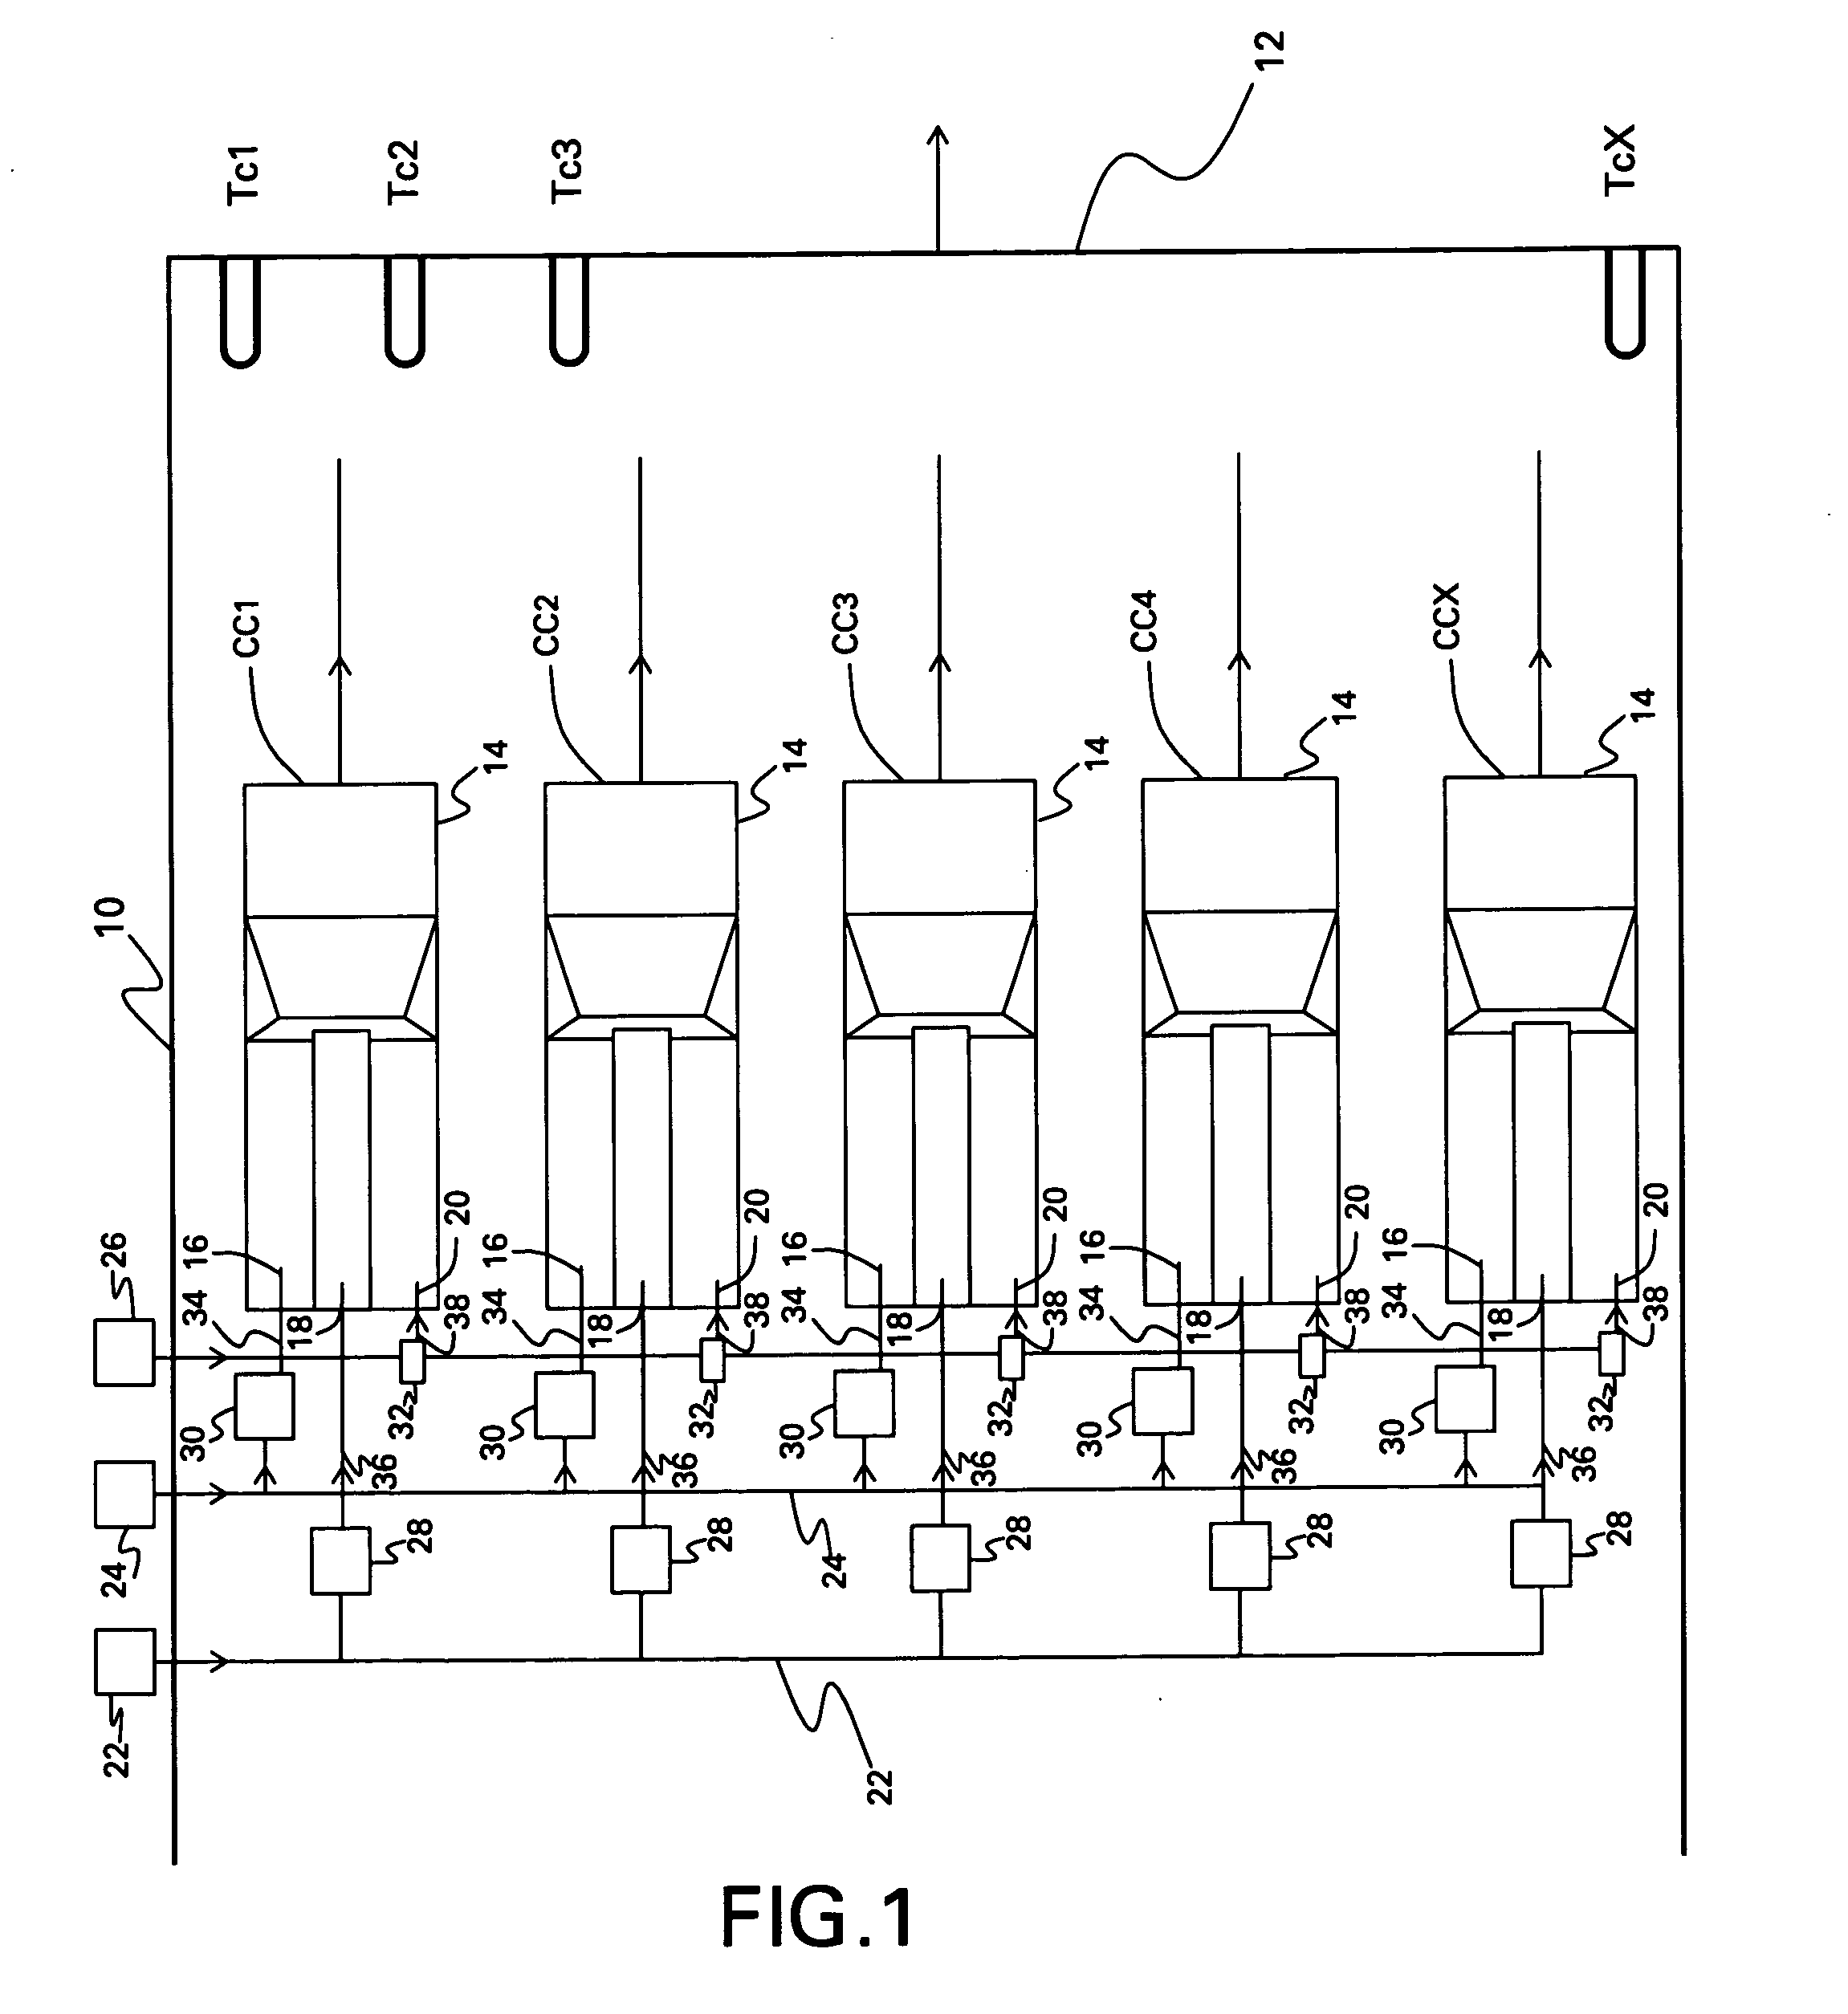 Method and apparatus for actuating fuel trim valves in a gas turbine